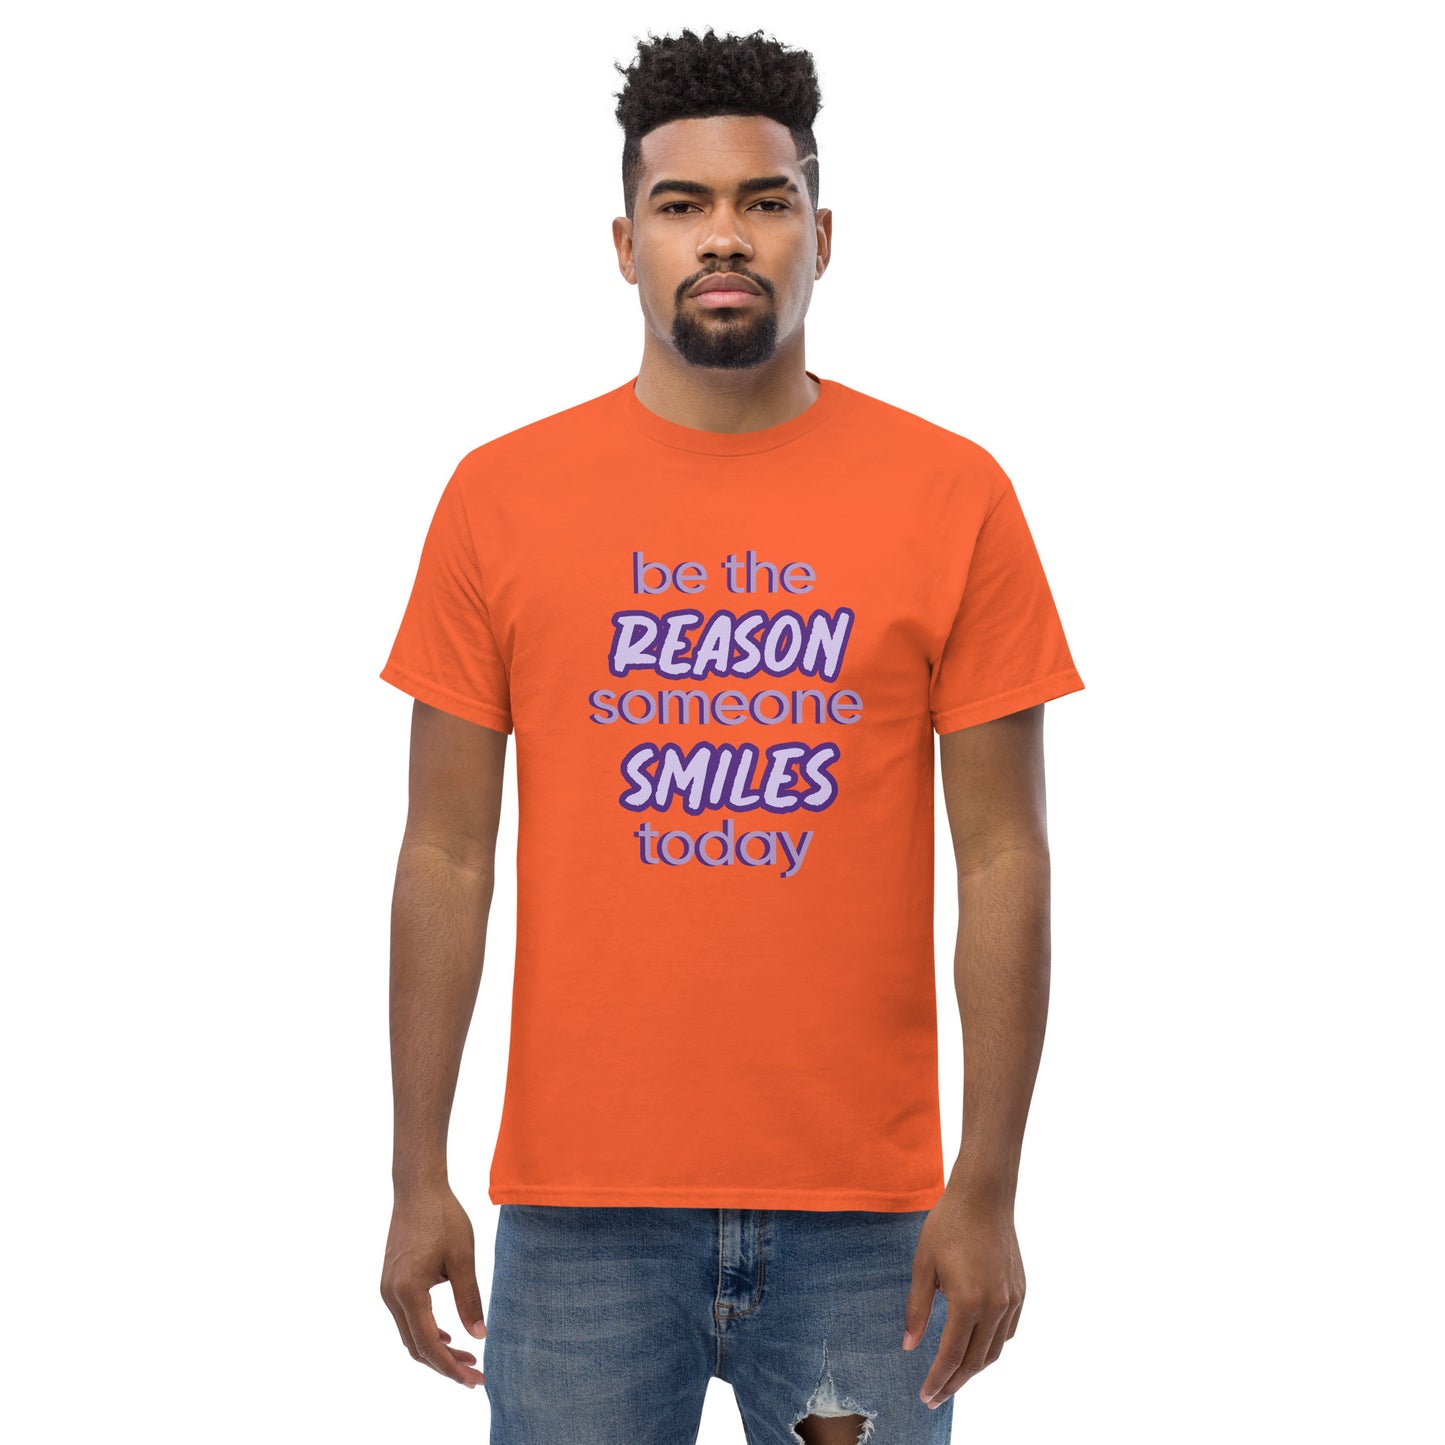 Men with orange T-shirt and the quote "be the reason someone smiles today" in purple on it. 